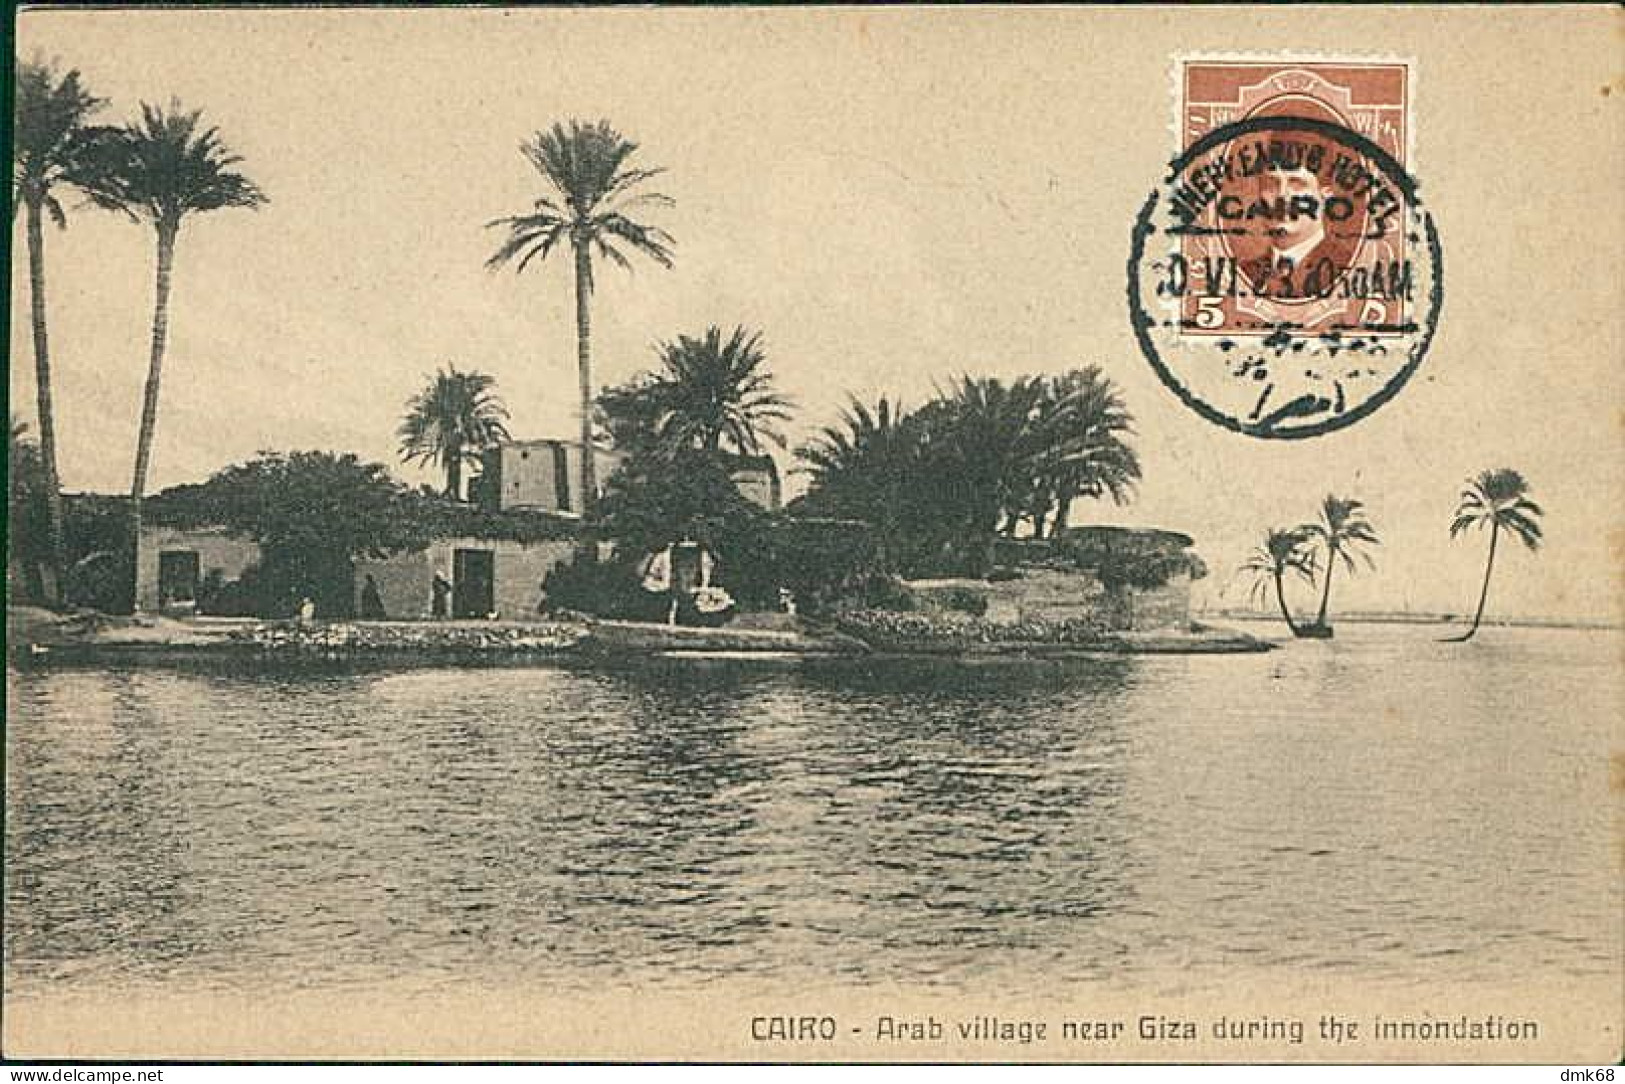 EGYPT - CAIRO - ARAB VILLAGE NEAR GIZA DURING THE INNONDATION  - EDIT SCORTZIS  - 1920s / STAMP (12691) - Le Caire